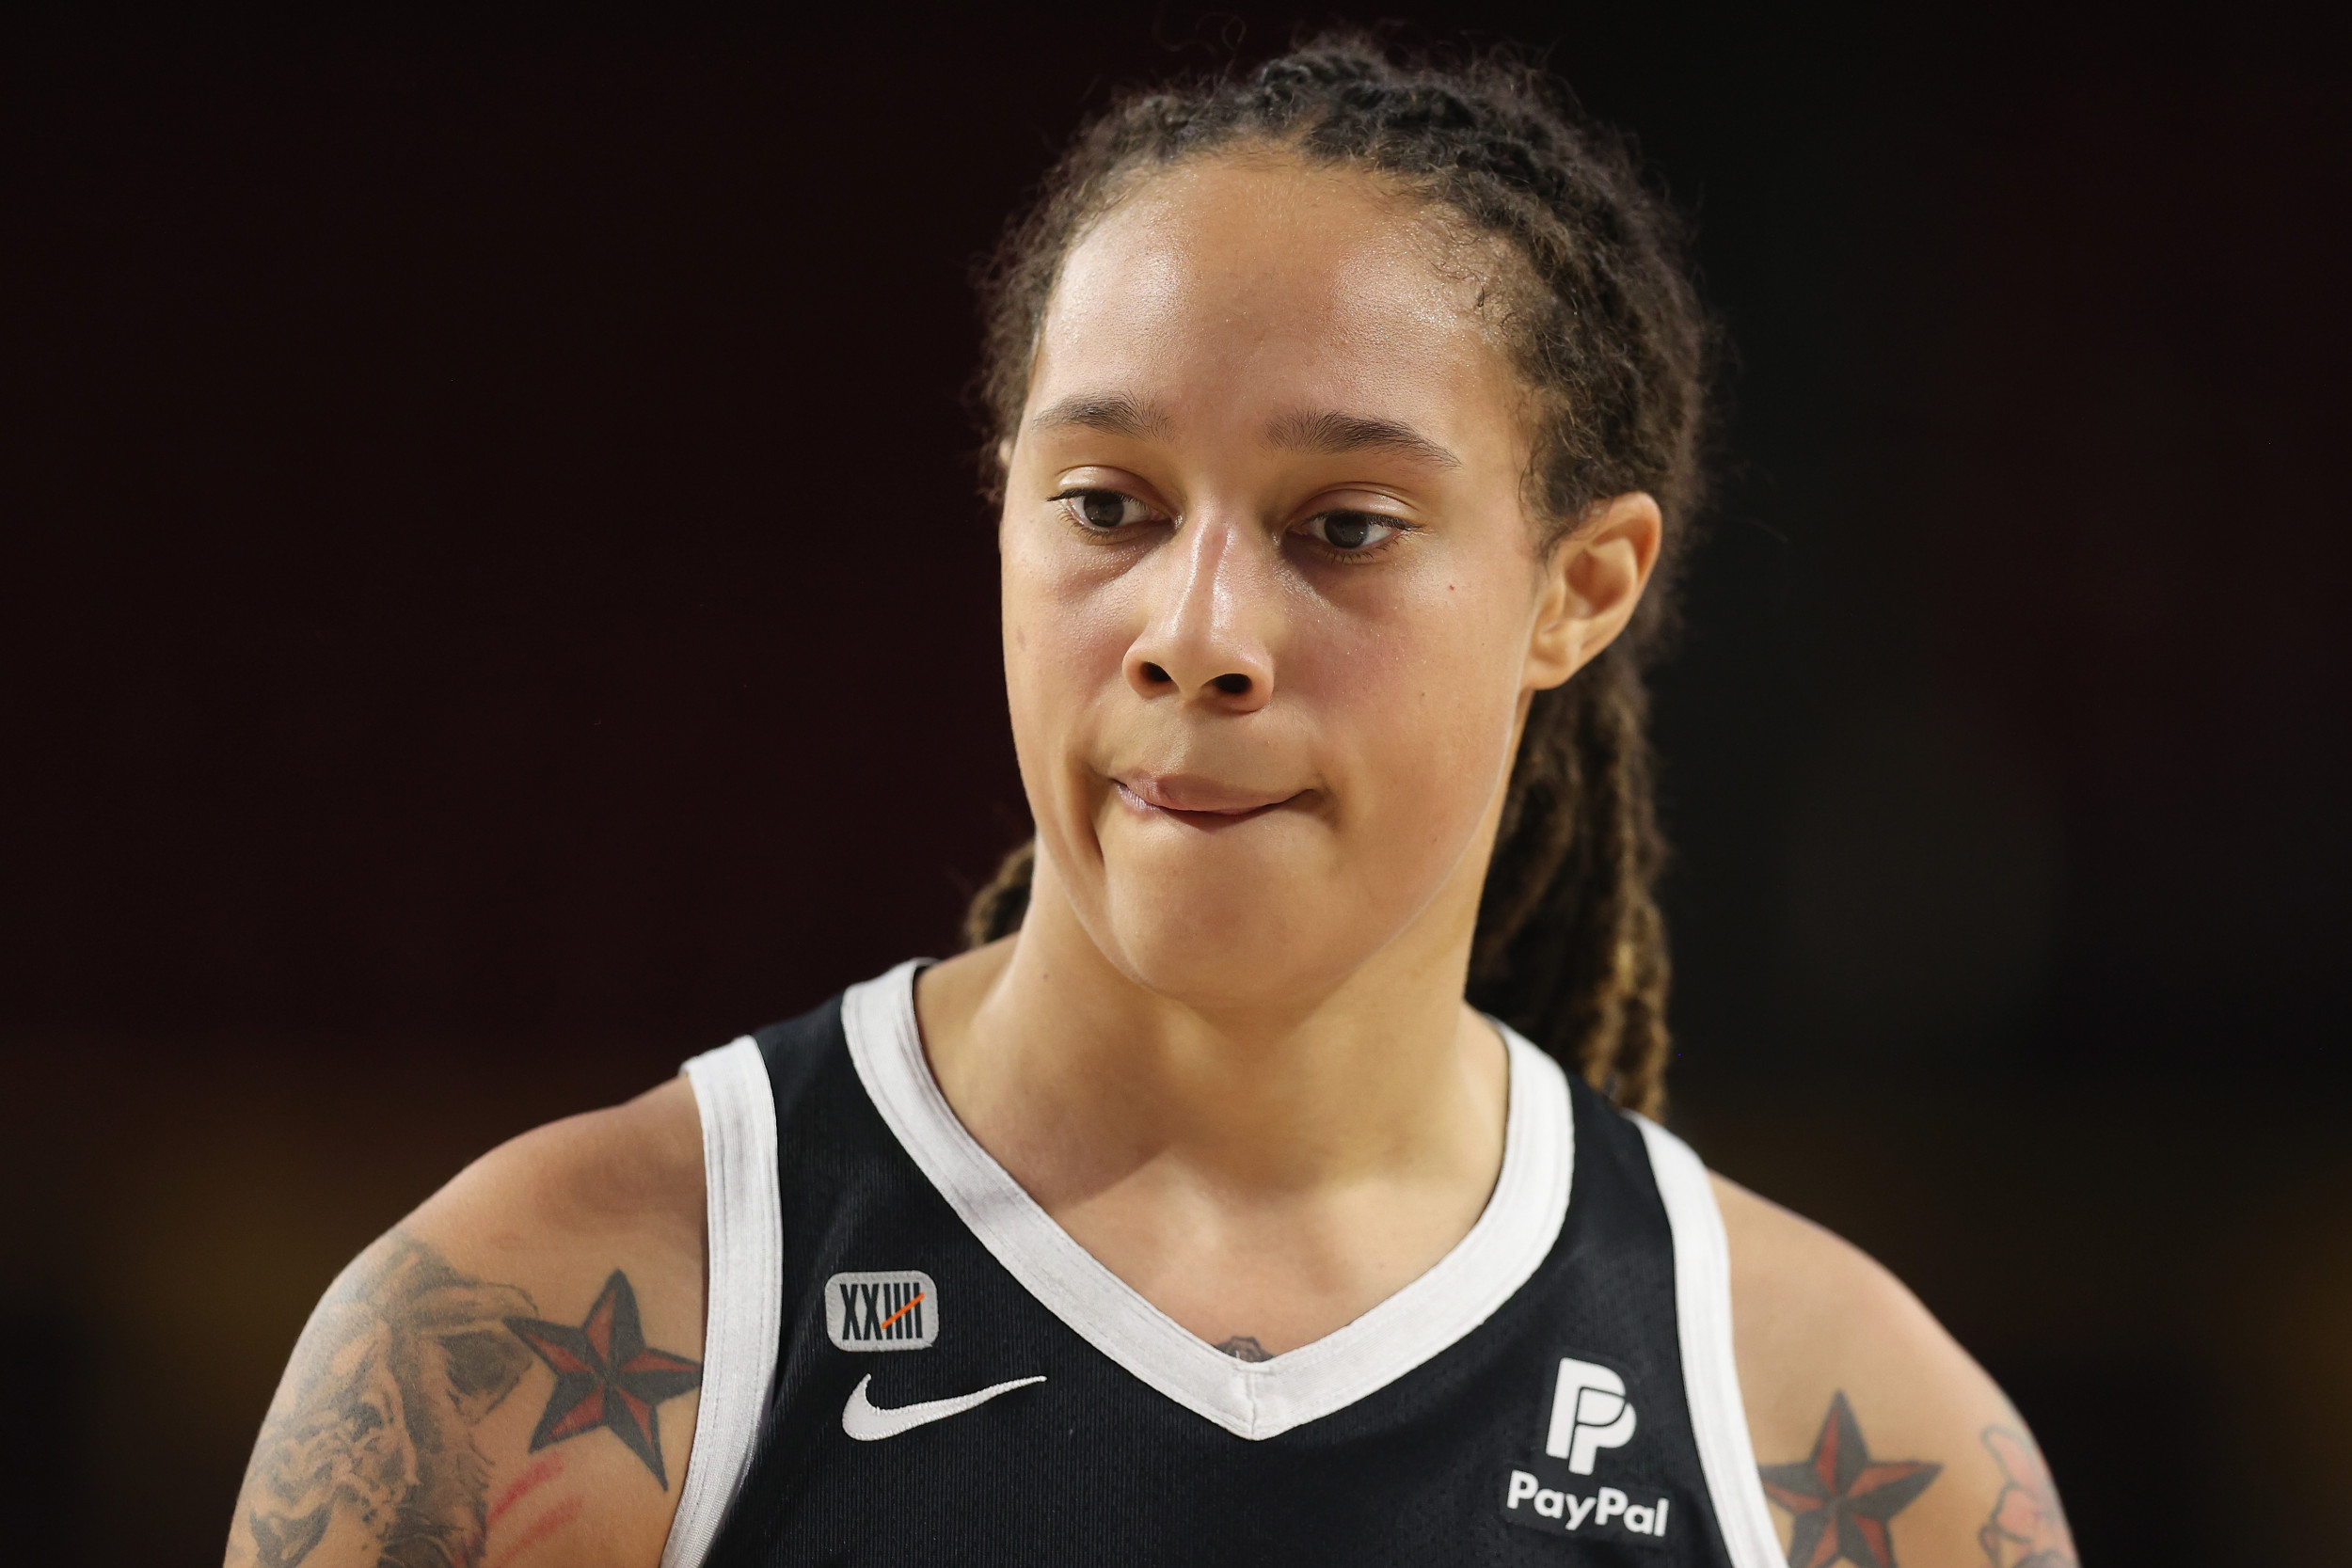 Russia claims Brittney Griner 